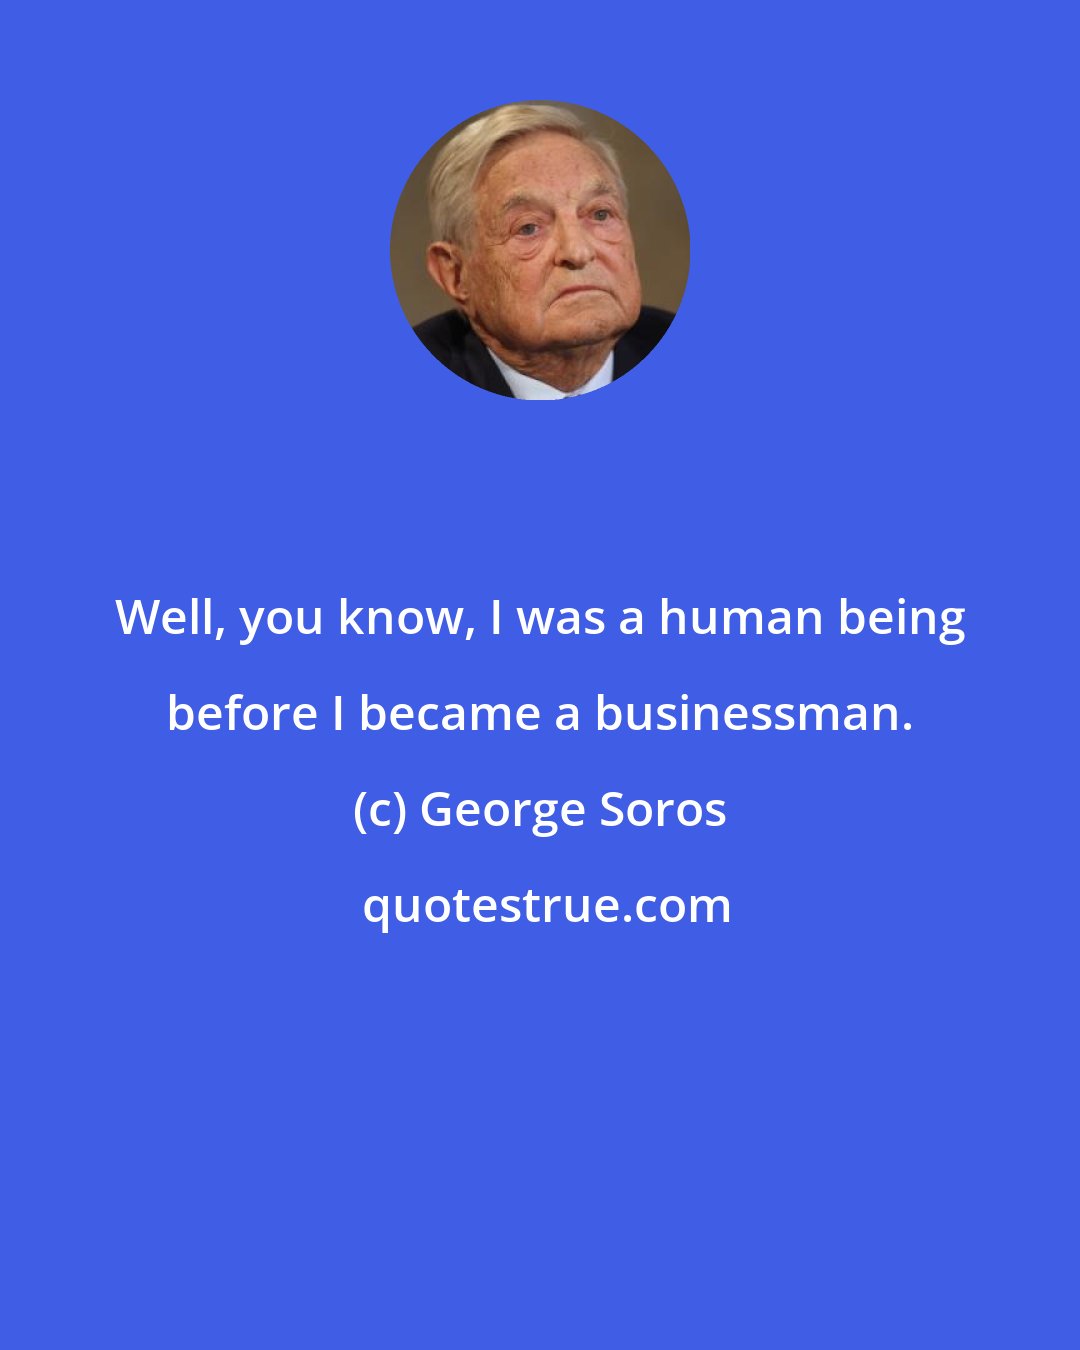 George Soros: Well, you know, I was a human being before I became a businessman.